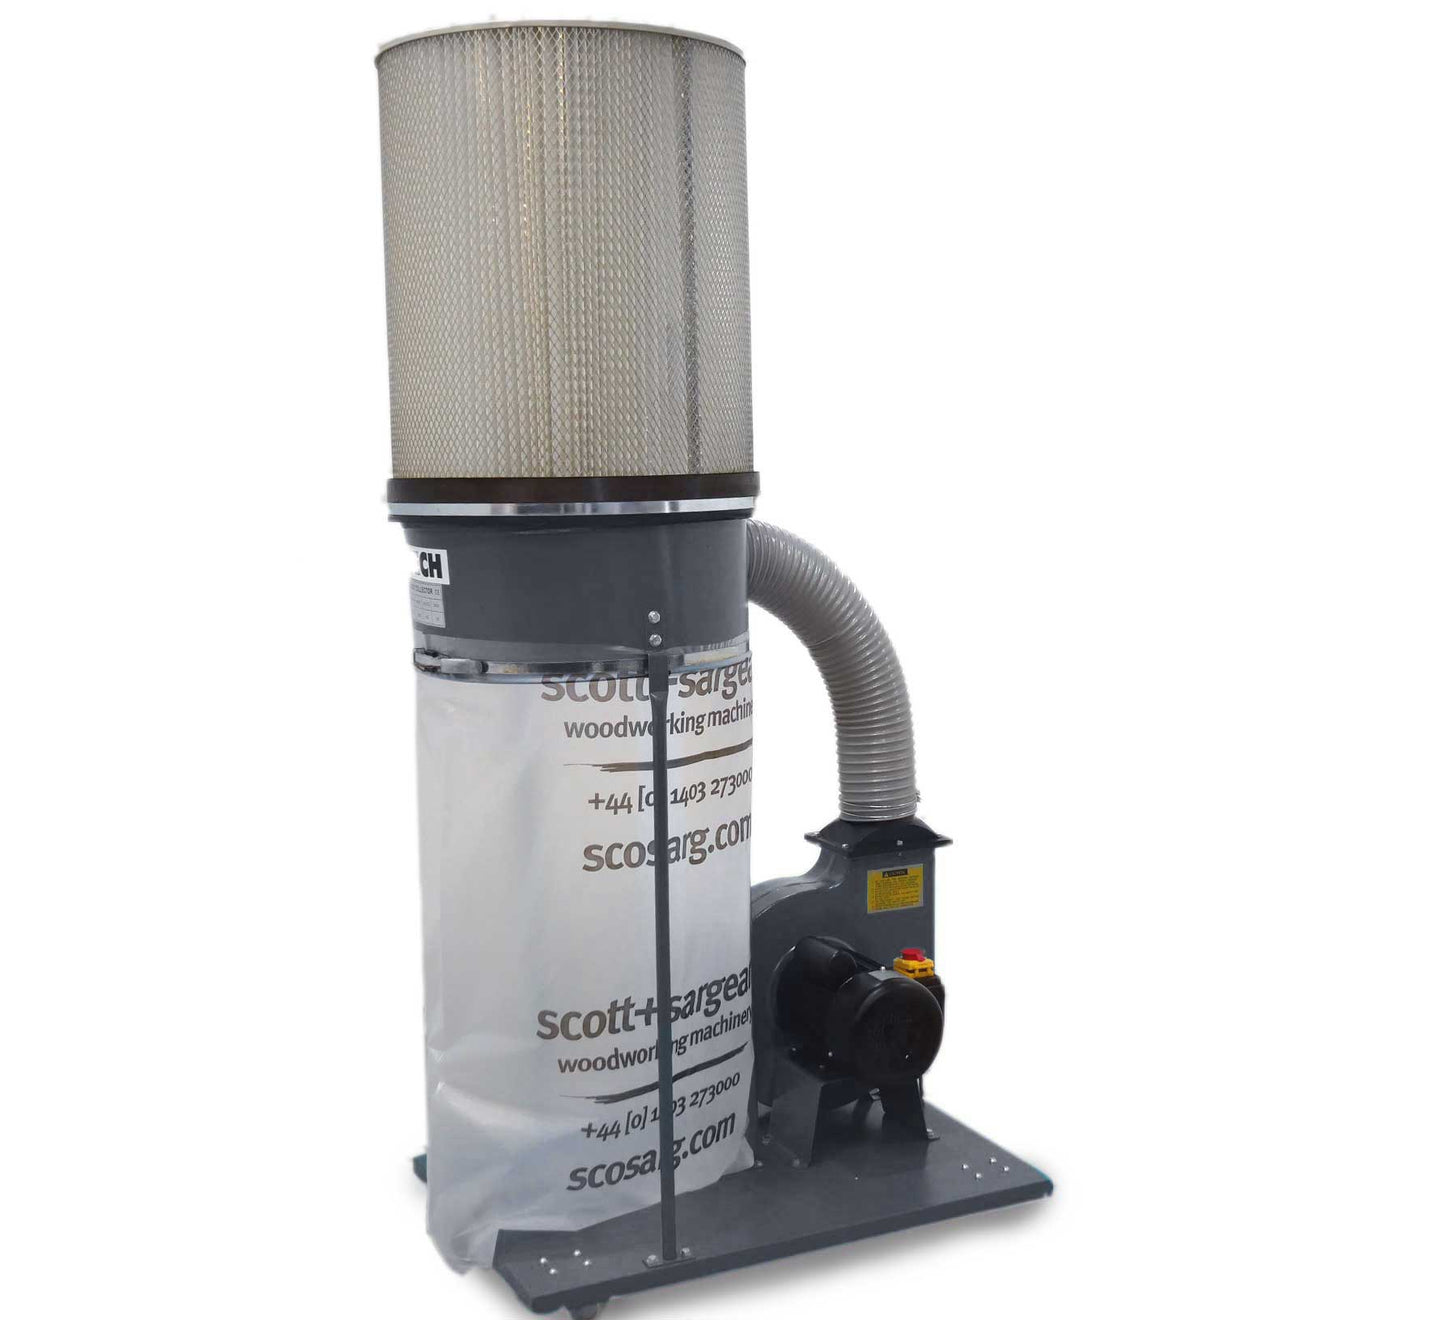 DC001 MOBILE EXTRACTOR 230V 1PH WITH FINE FILTER